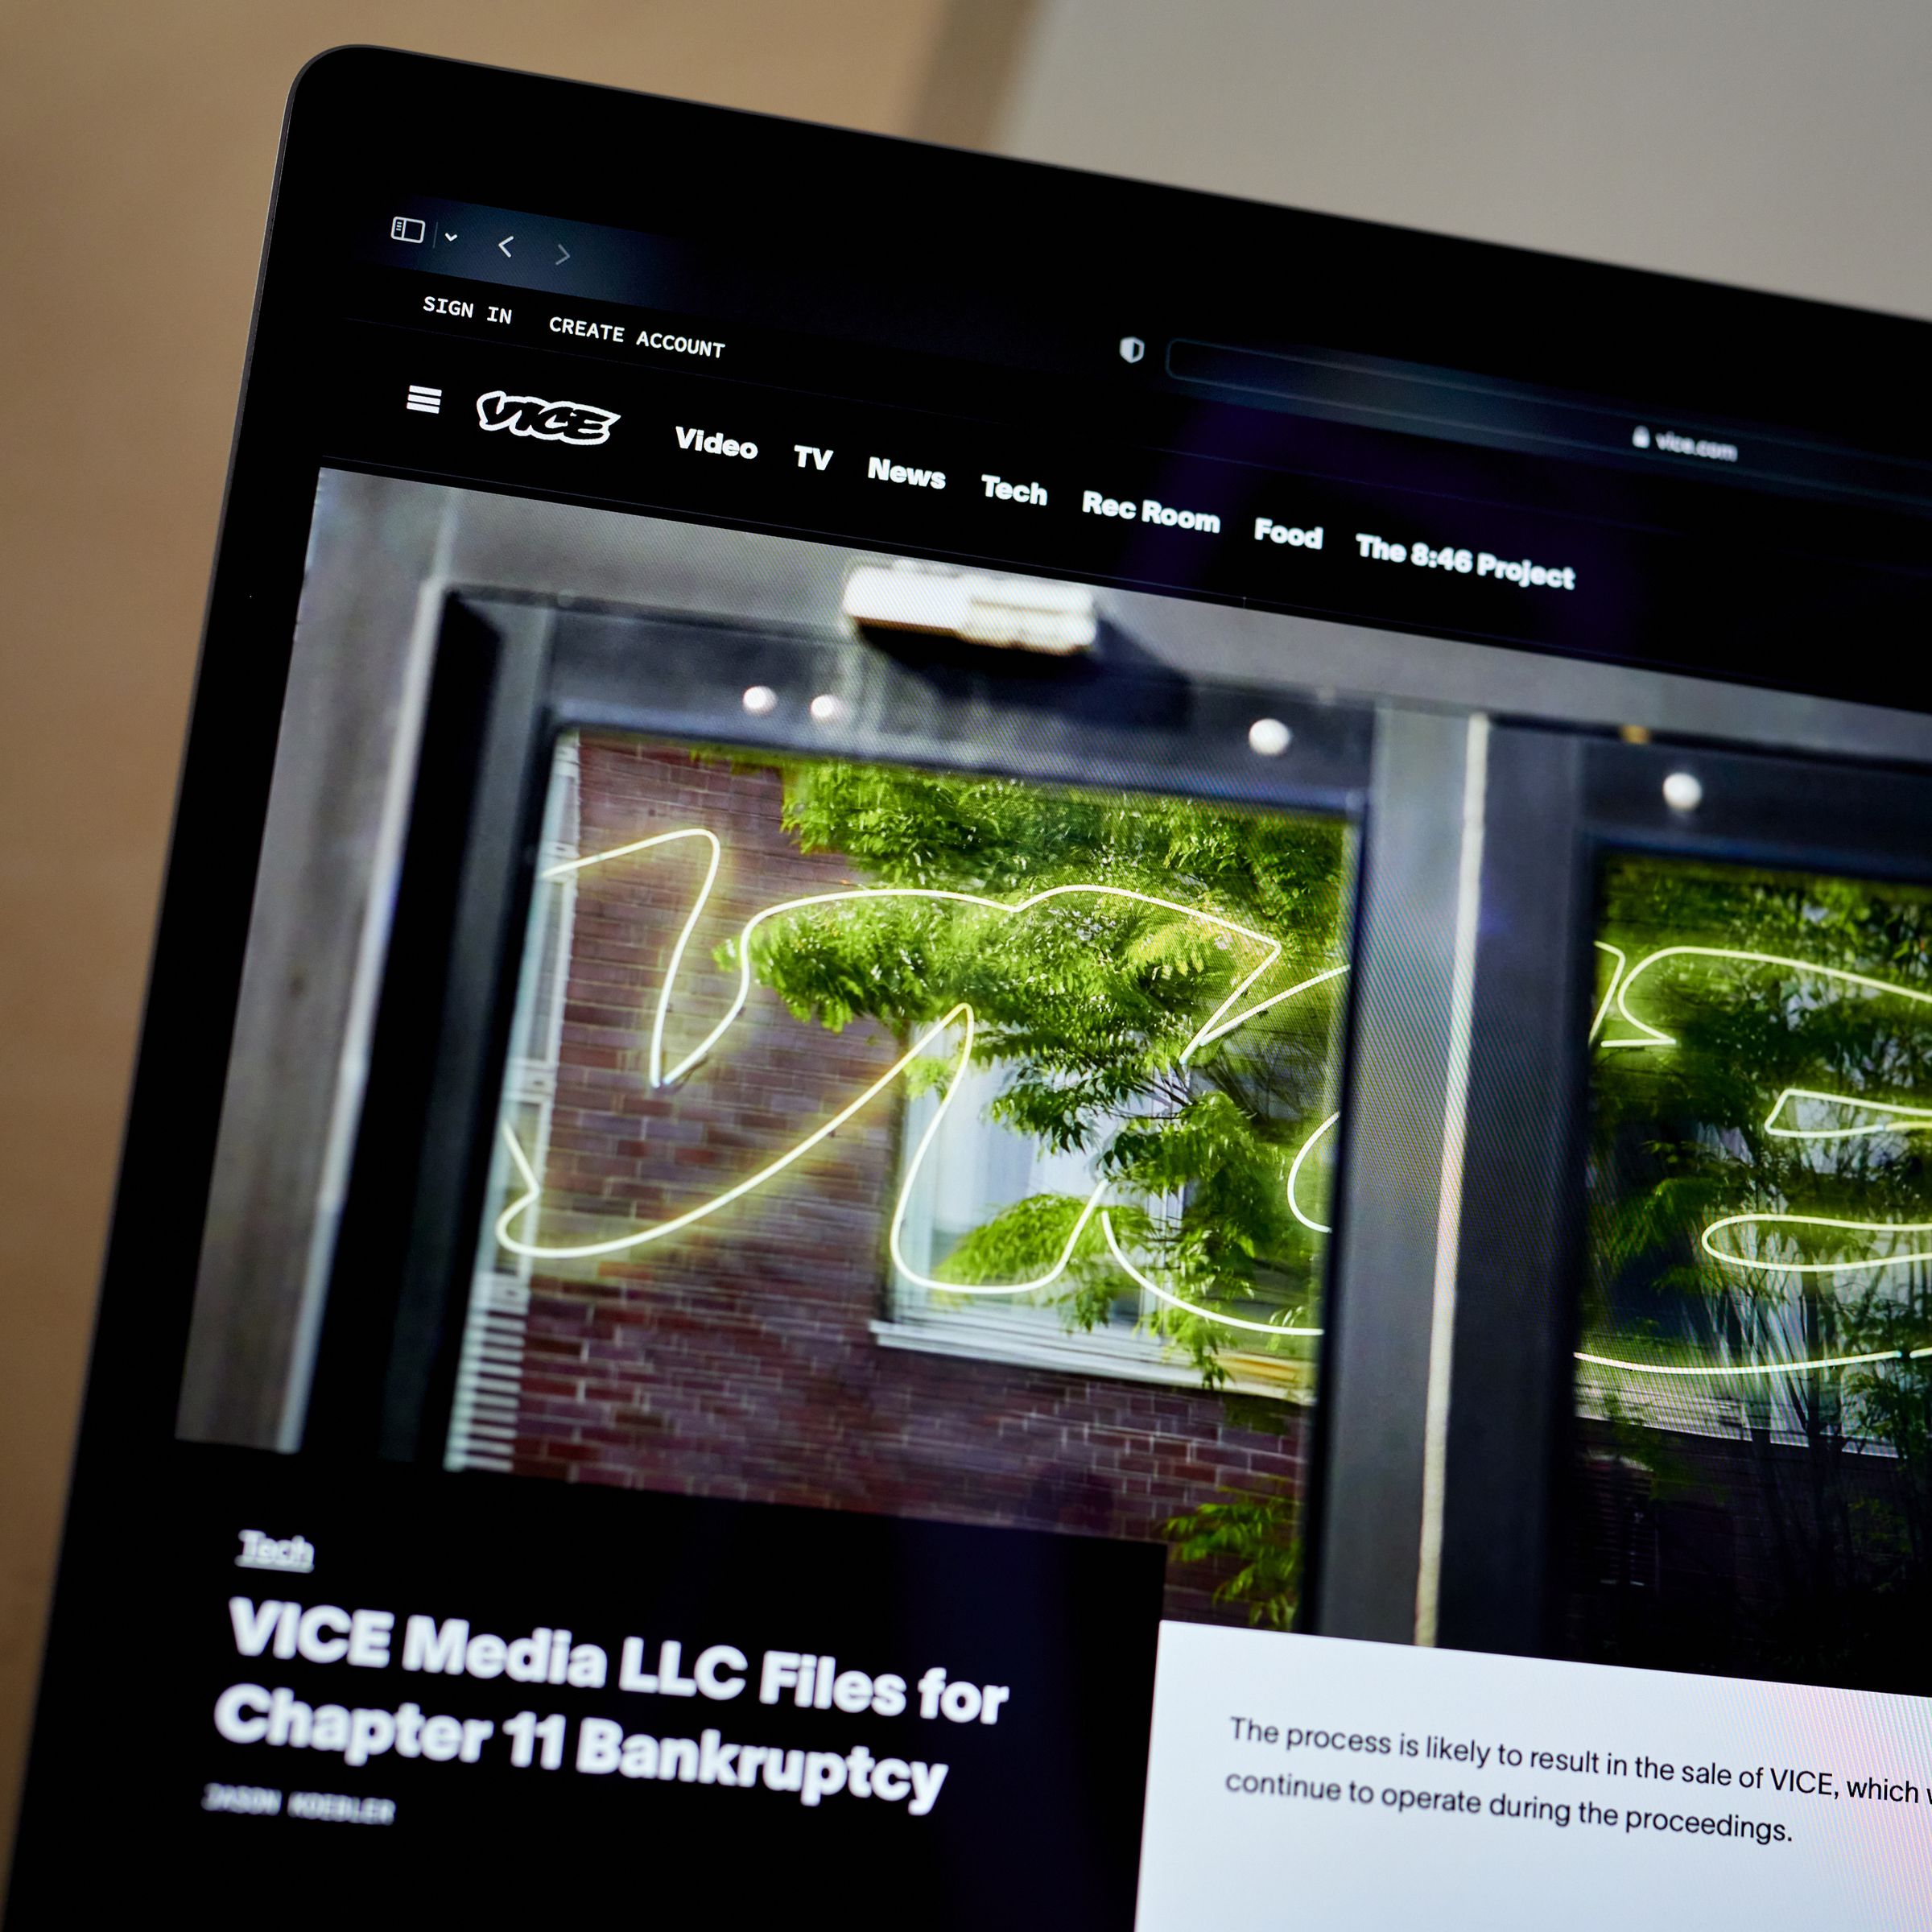 A photo showing the Vice website open on a laptop